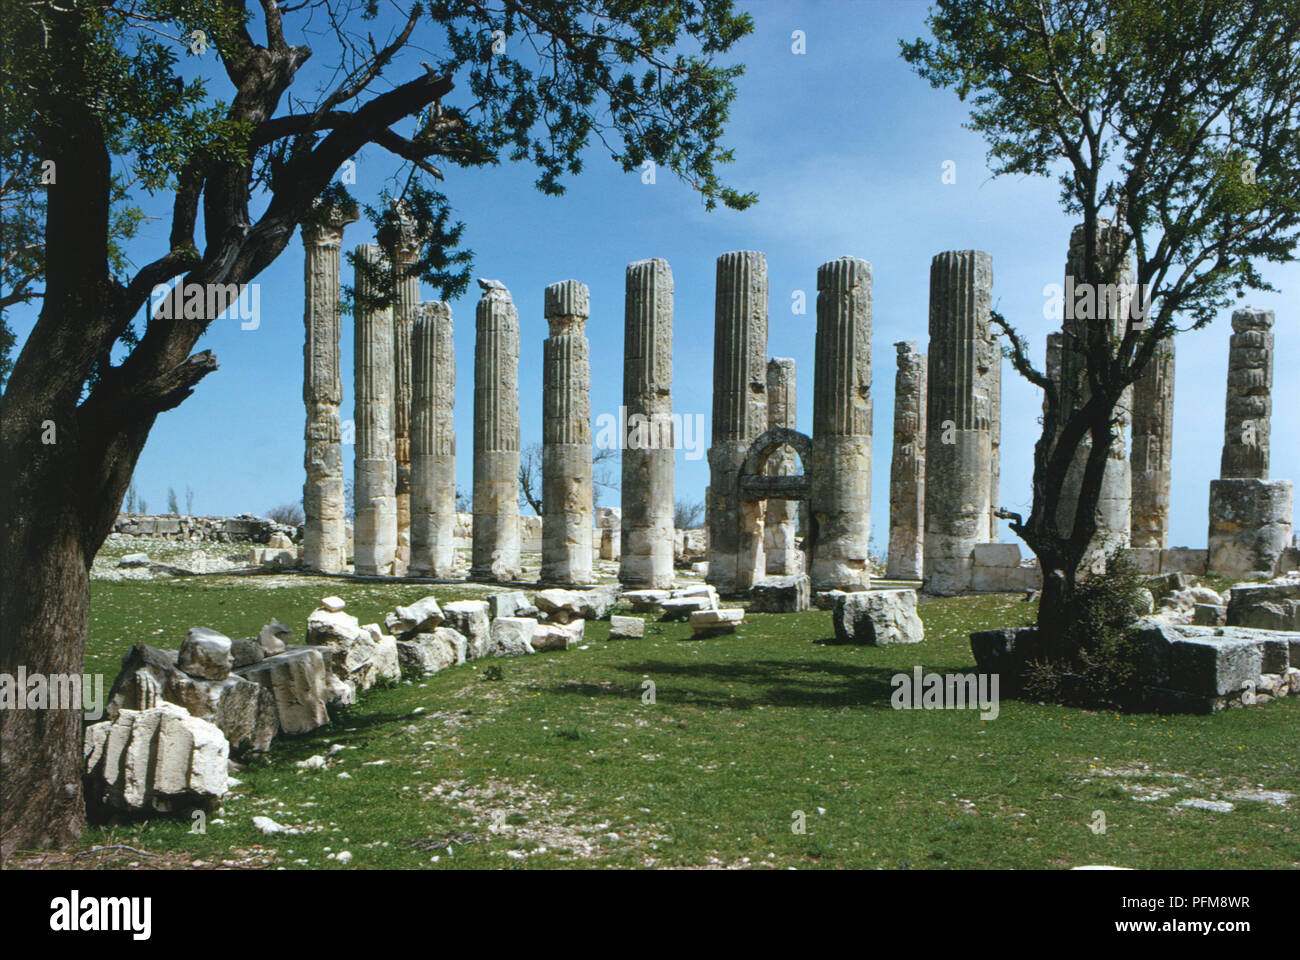 Turkey, Kayseri, ancient ruins and columns in parallel rows, framed by trees. Stock Photo